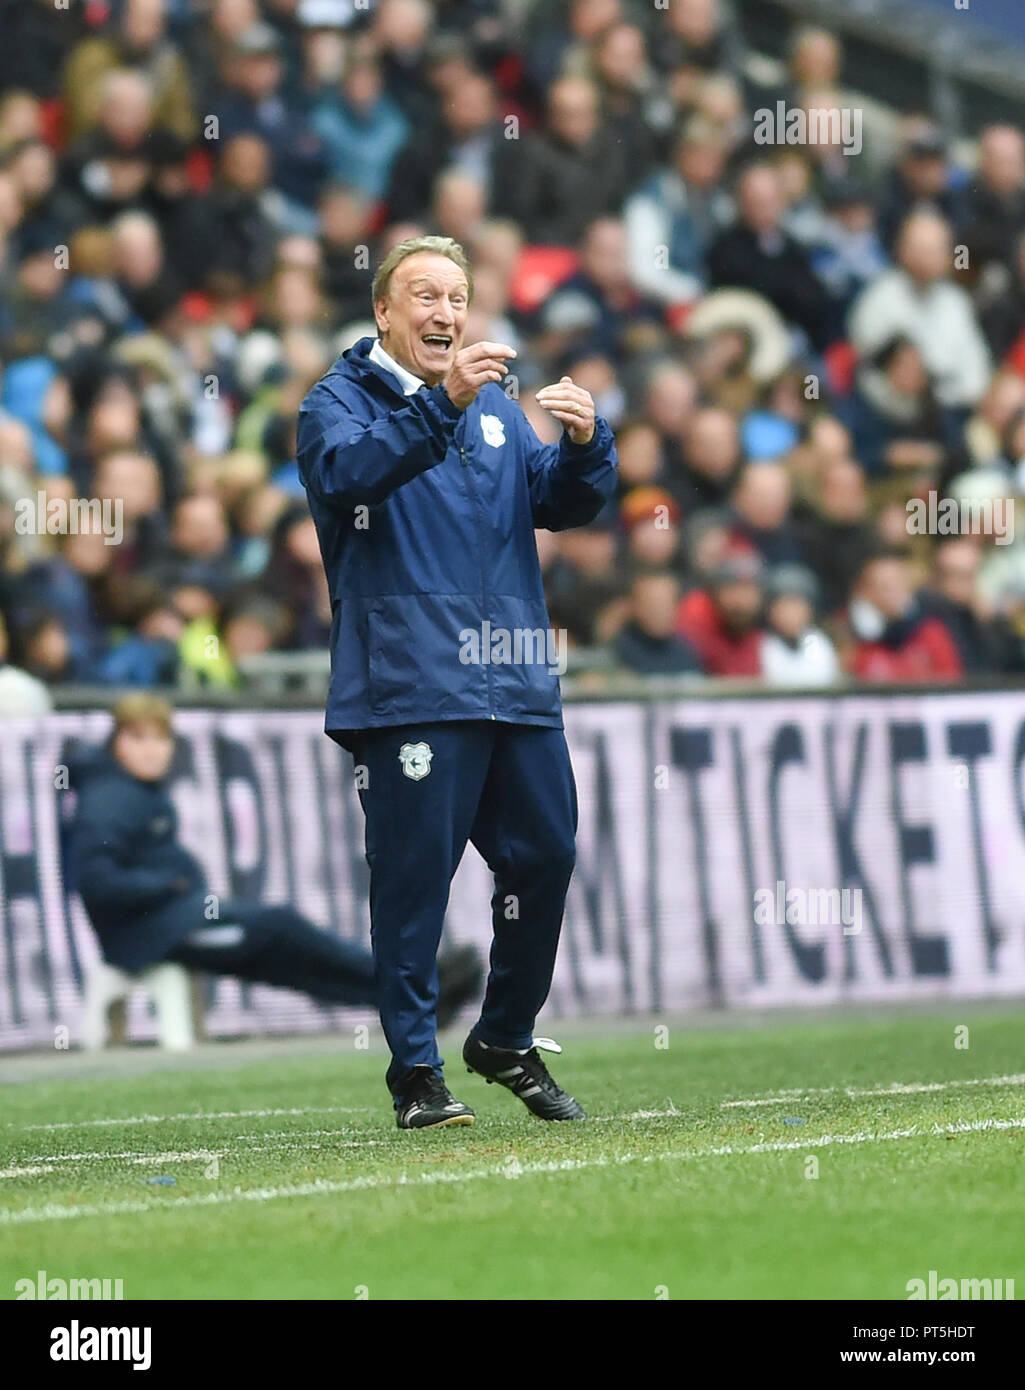 Cardiffs Manager  Neil Warnock during the Premier League match between Tottenham Hotspur and Cardiff City at Wembley Stadium , London , 06 October 2018 Editorial use only. No merchandising. For Football images FA and Premier League restrictions apply inc. no internet/mobile usage without FAPL license - for details contact Football Dataco Stock Photo